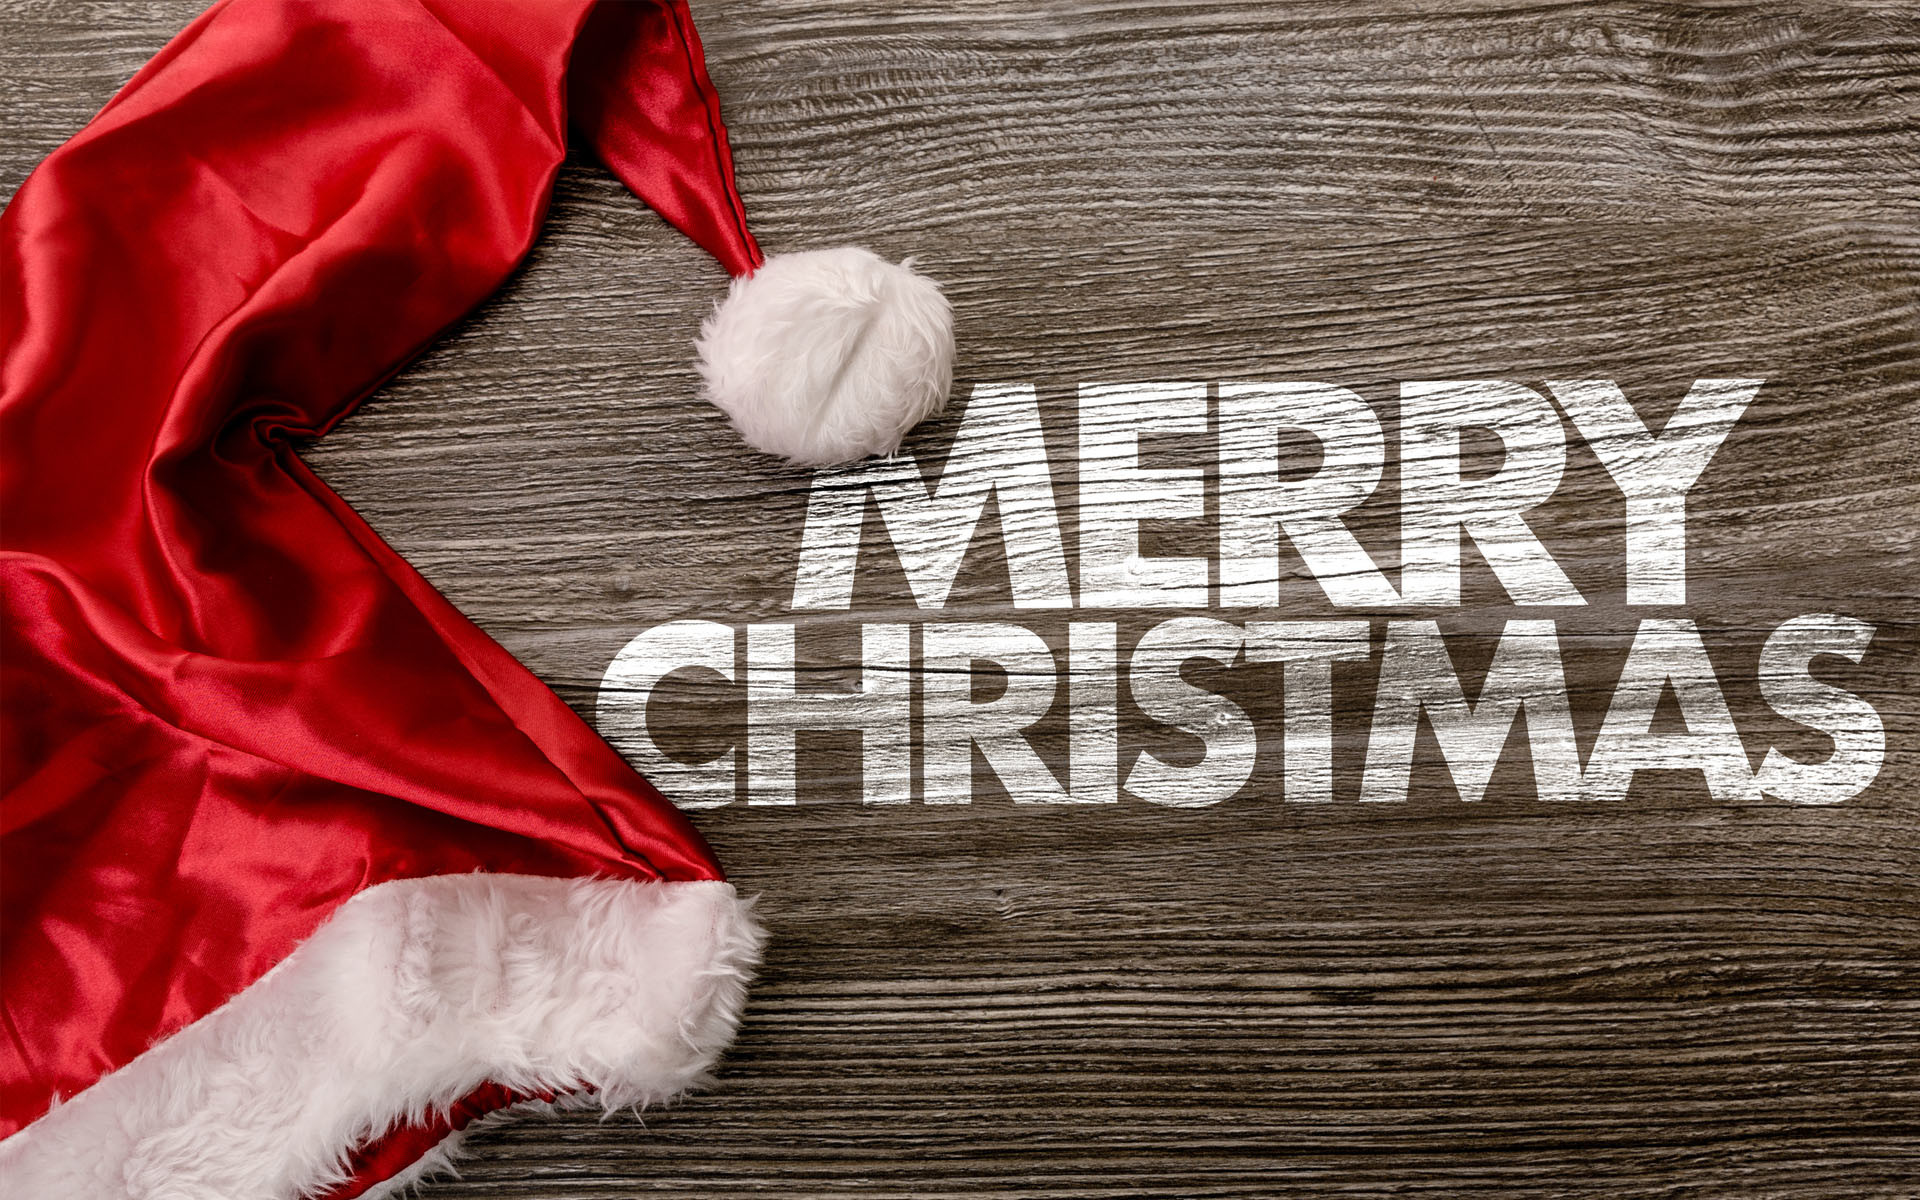 1920x1200, Christmas On Wooden Texture With Red Cap - Santa Claus Merry Christmas Images Hd - HD Wallpaper 